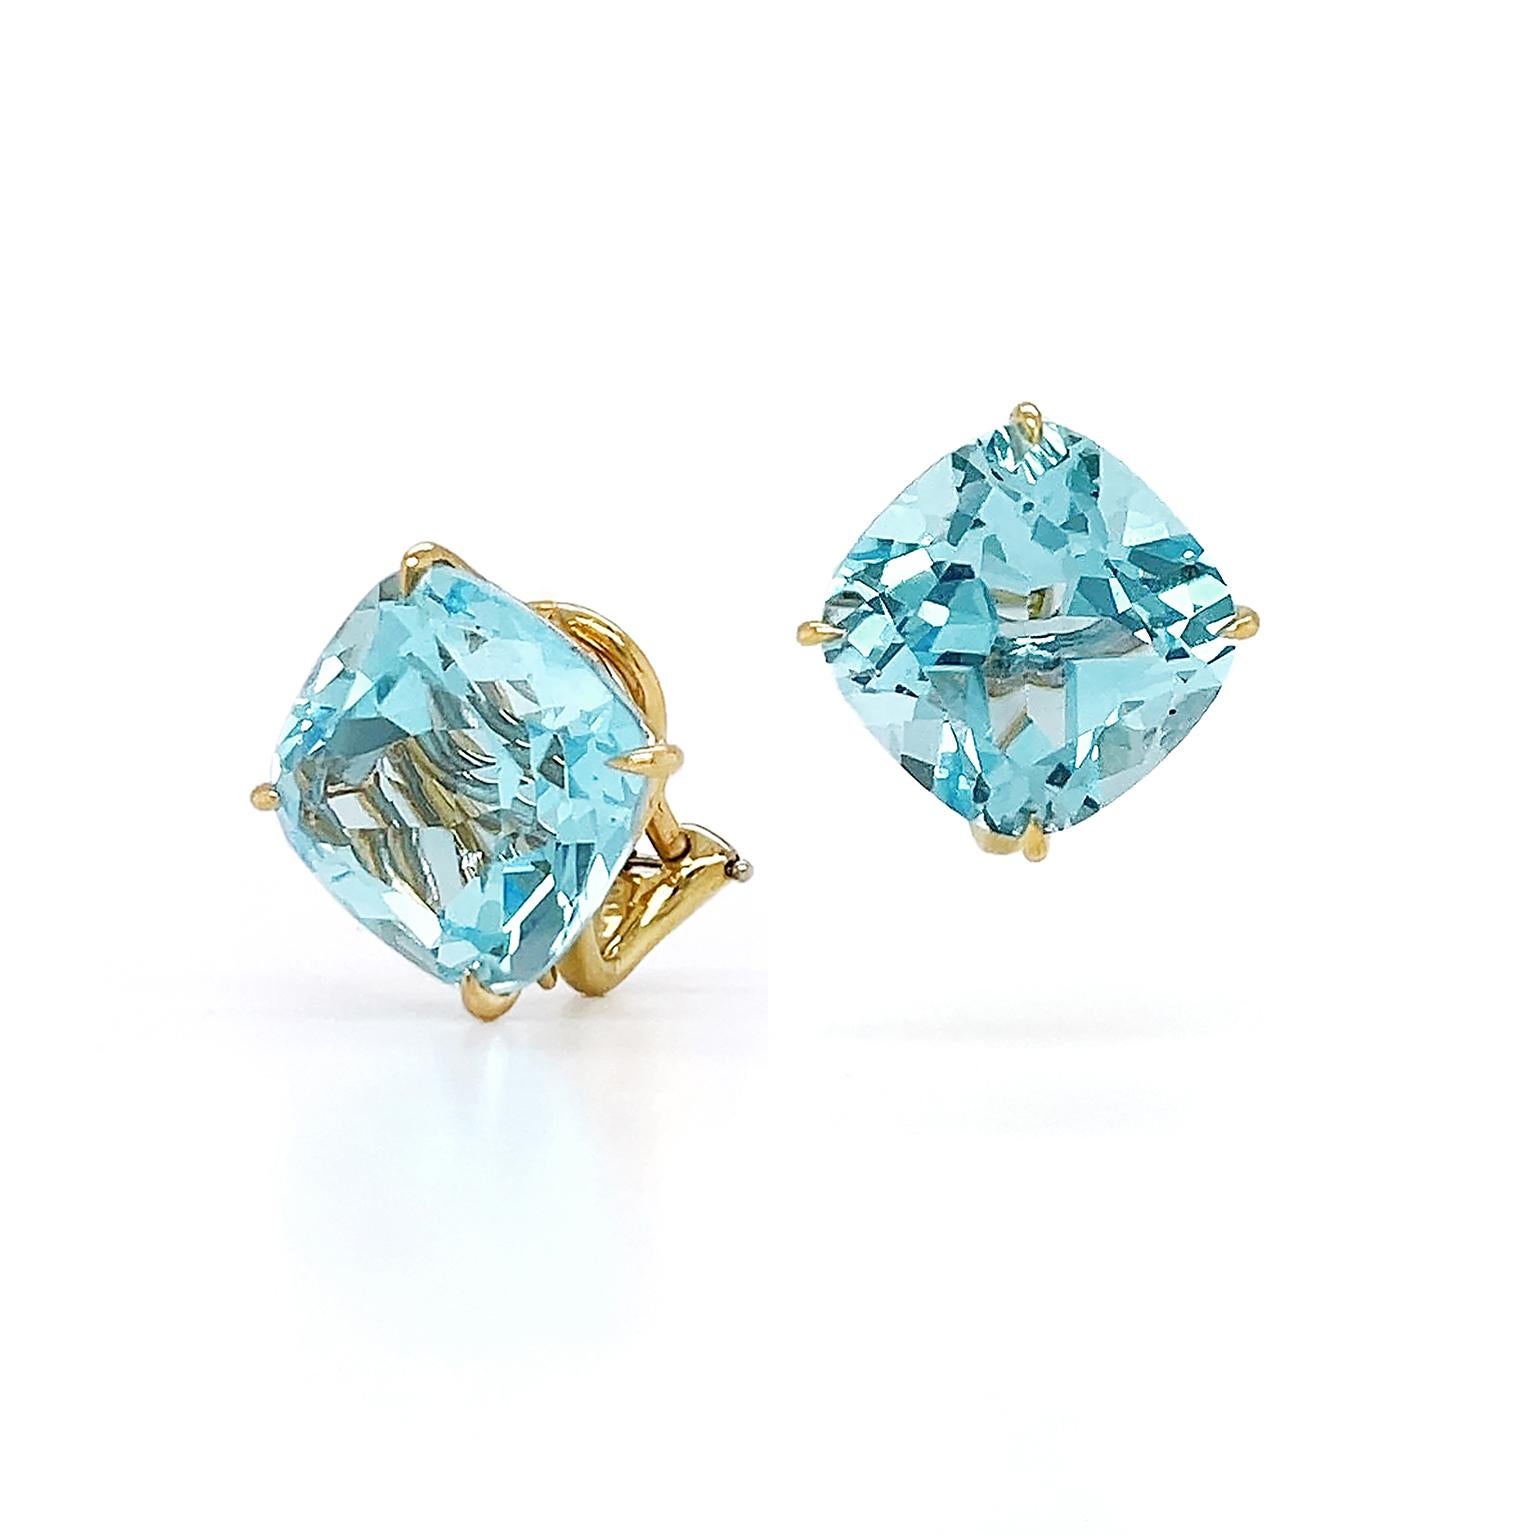 Glistering aqua hues are the focus of these blue topaz earrings. Carved into a classic cushion cut, sparkling dispersion emits from the blue topaz. The gem is turned on its side as a rhombus and secured by 18k yellow-gold claws for a contemporary